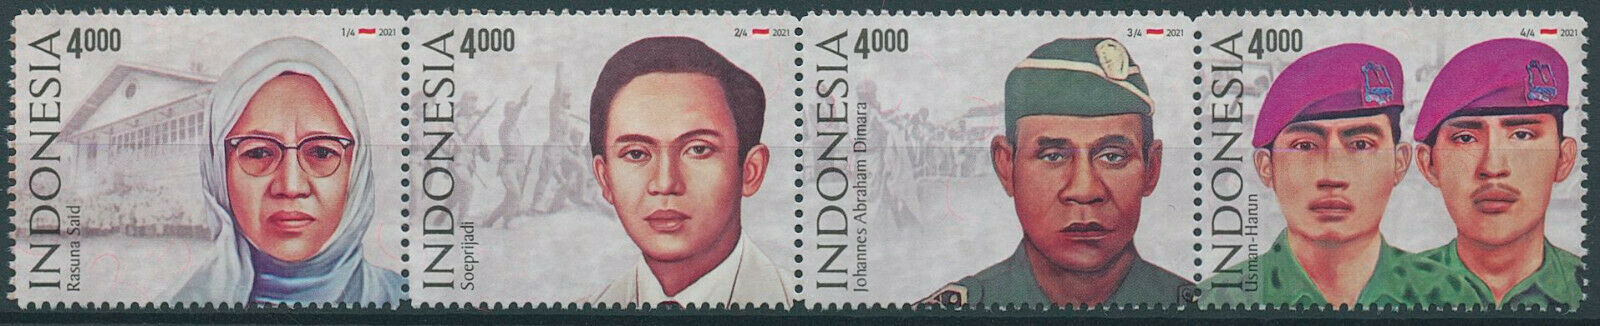 Indonesia 2021 MNH People Stamps Heroes Warriors Military Tokoh Pejuang 4v Strip